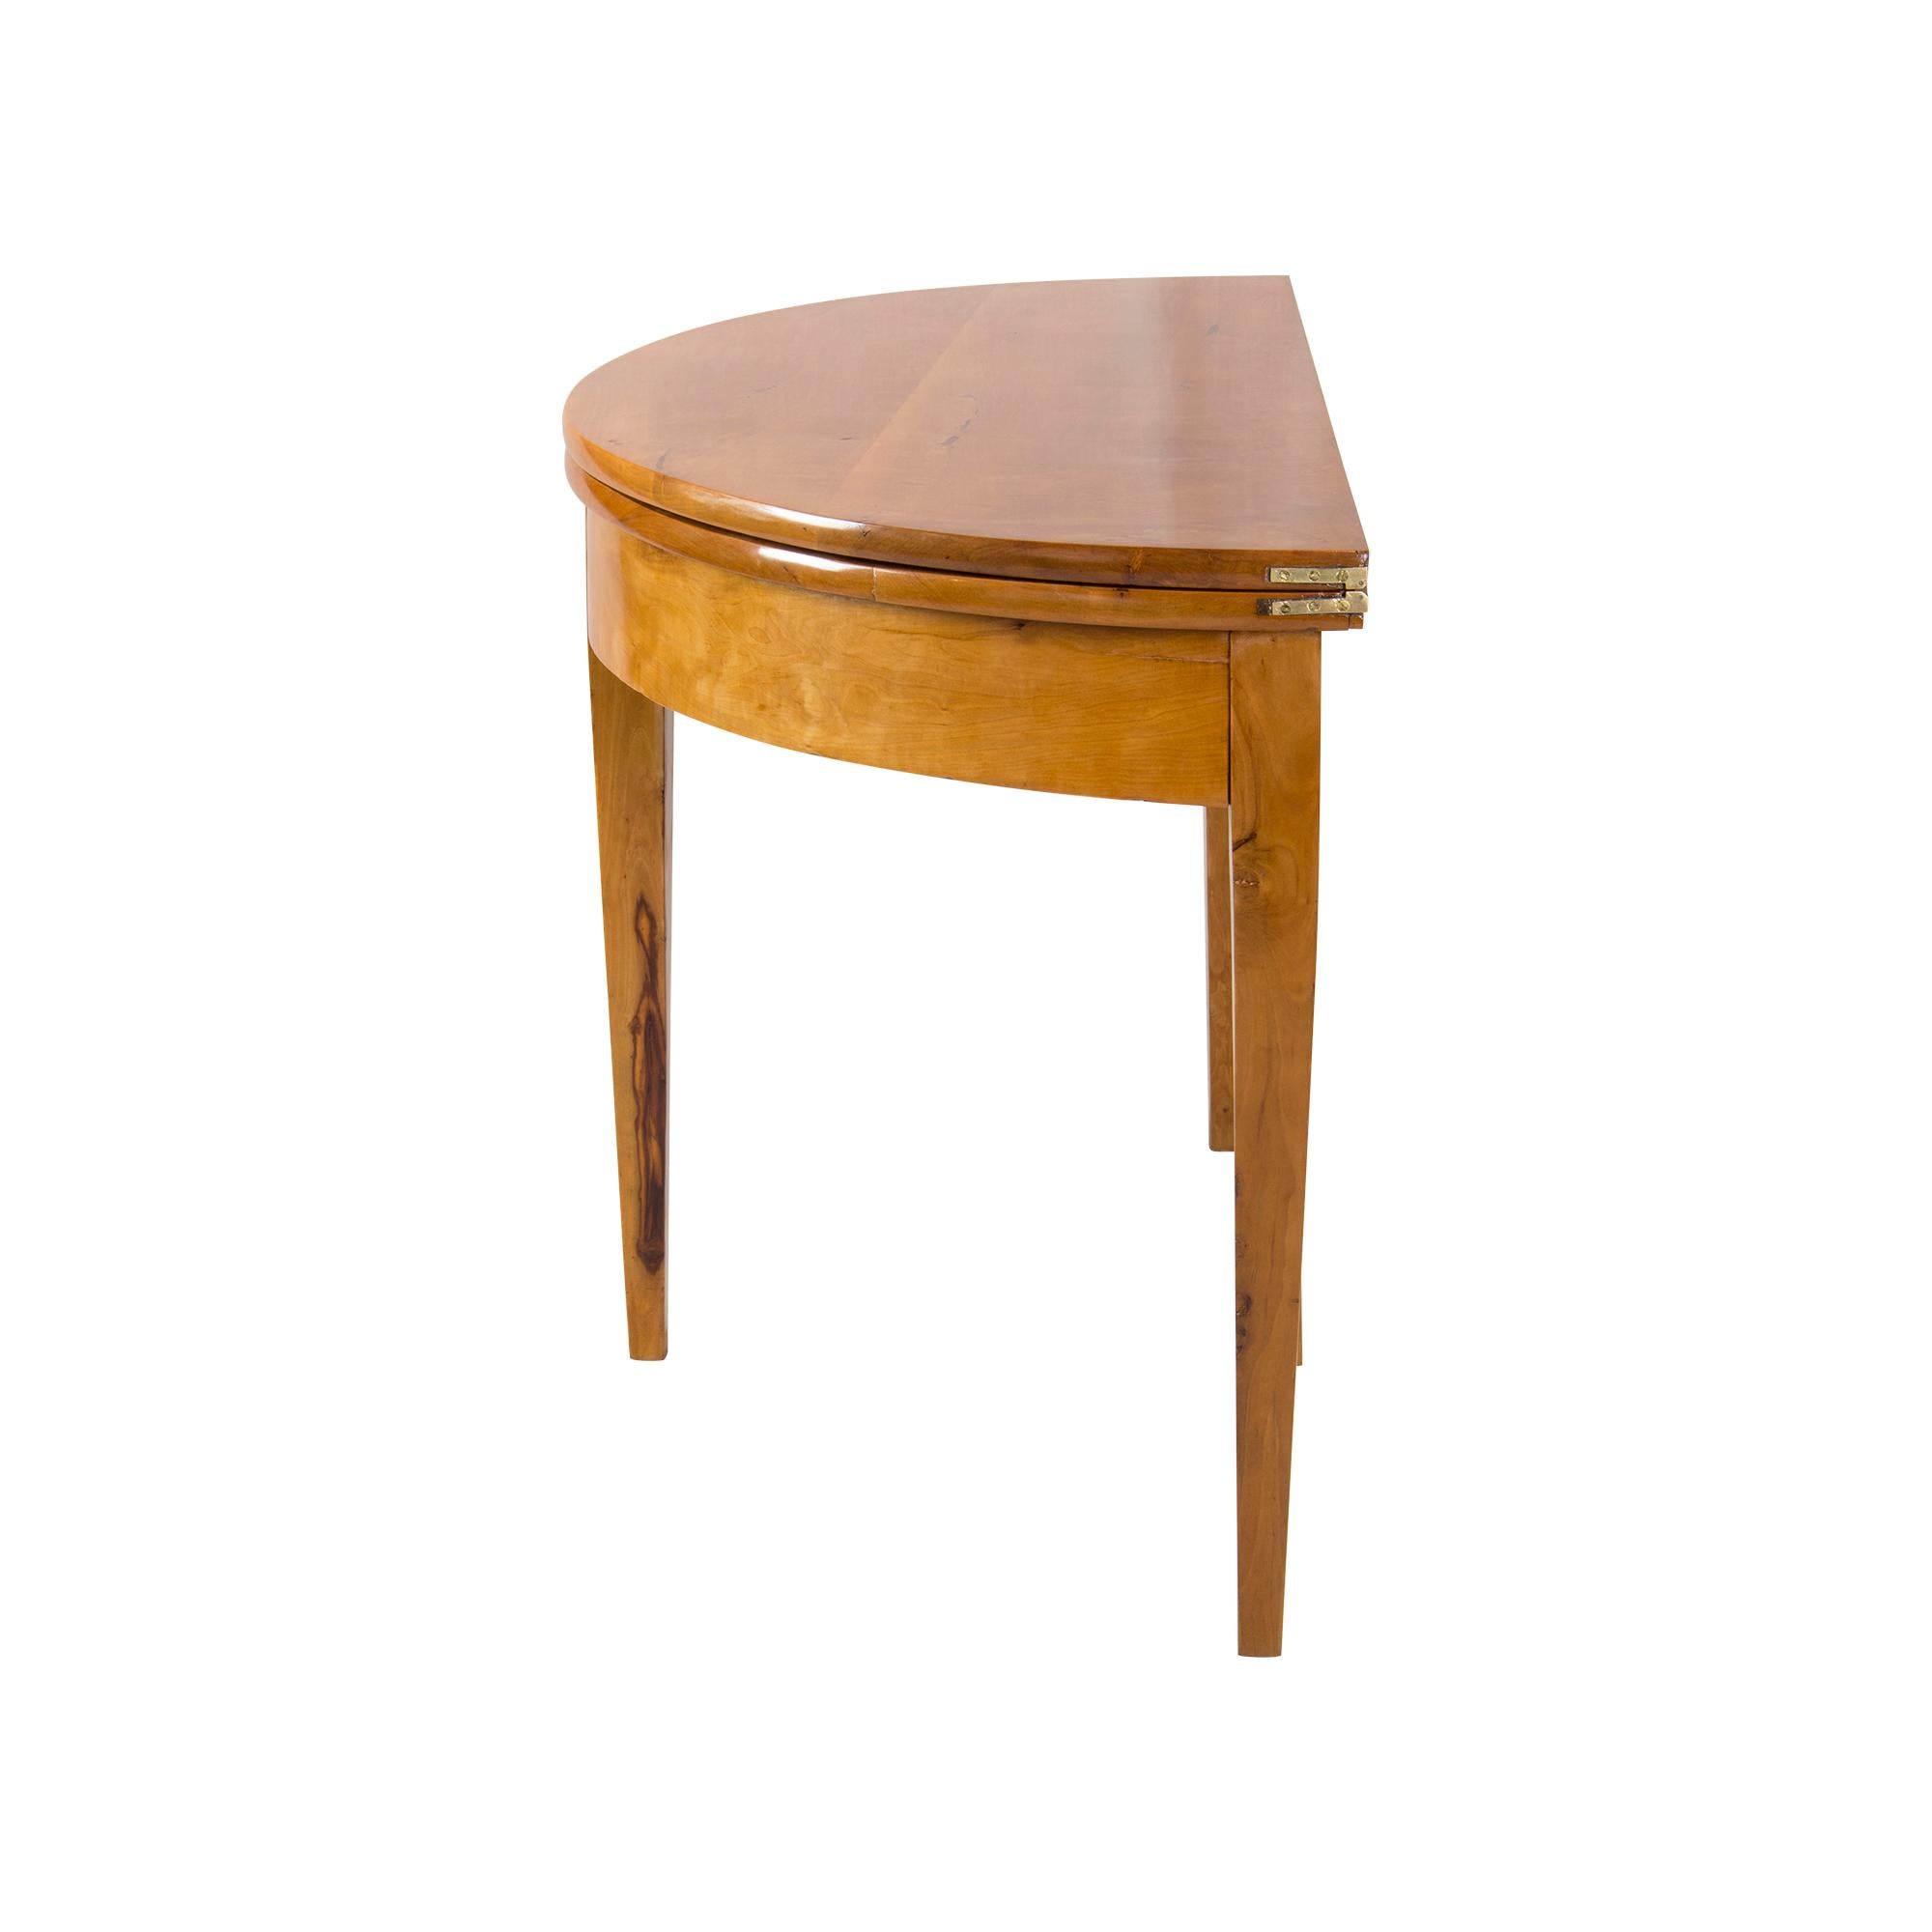 Antique 19th Century Biedermeier Demi Lune Fold-Out Table In Good Condition For Sale In Darmstadt, DE